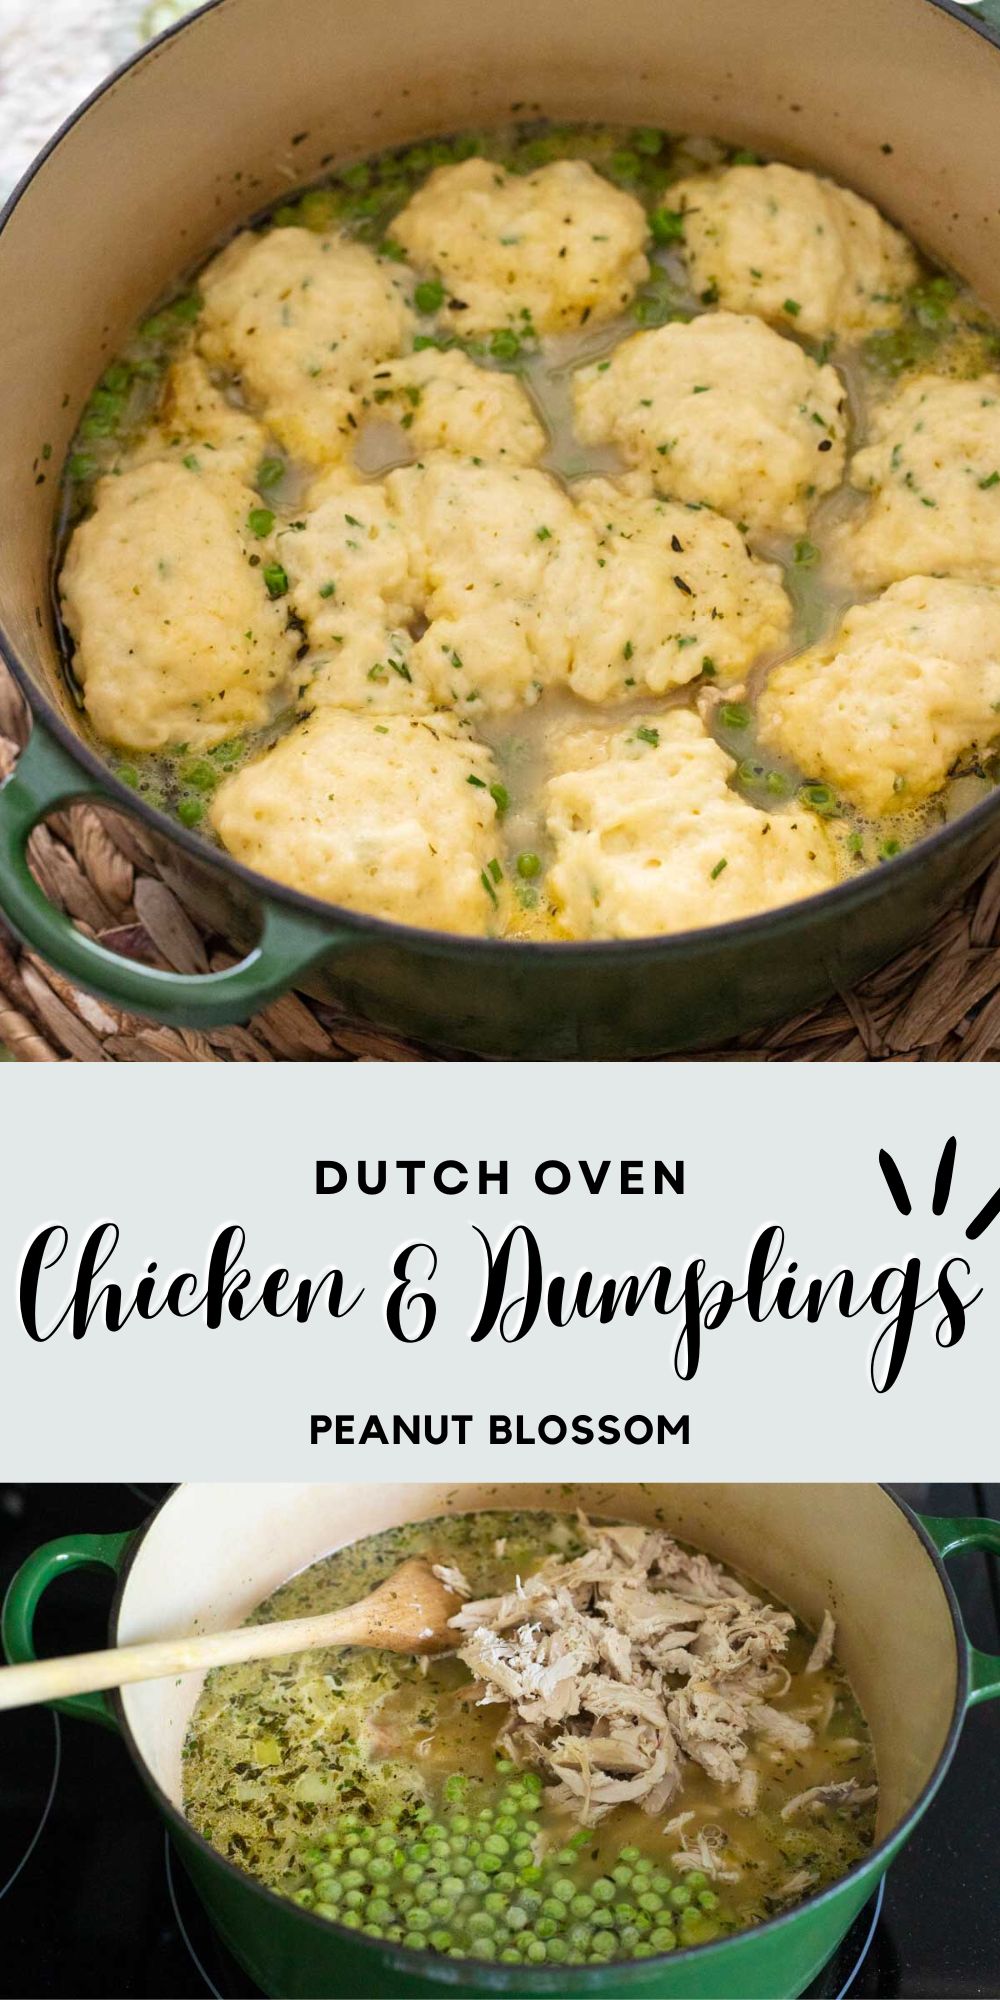 The photo collage shows a Dutch oven with the finished chicken and dumplings on top and in the process of adding the shredded chicken and peas on the bottom.